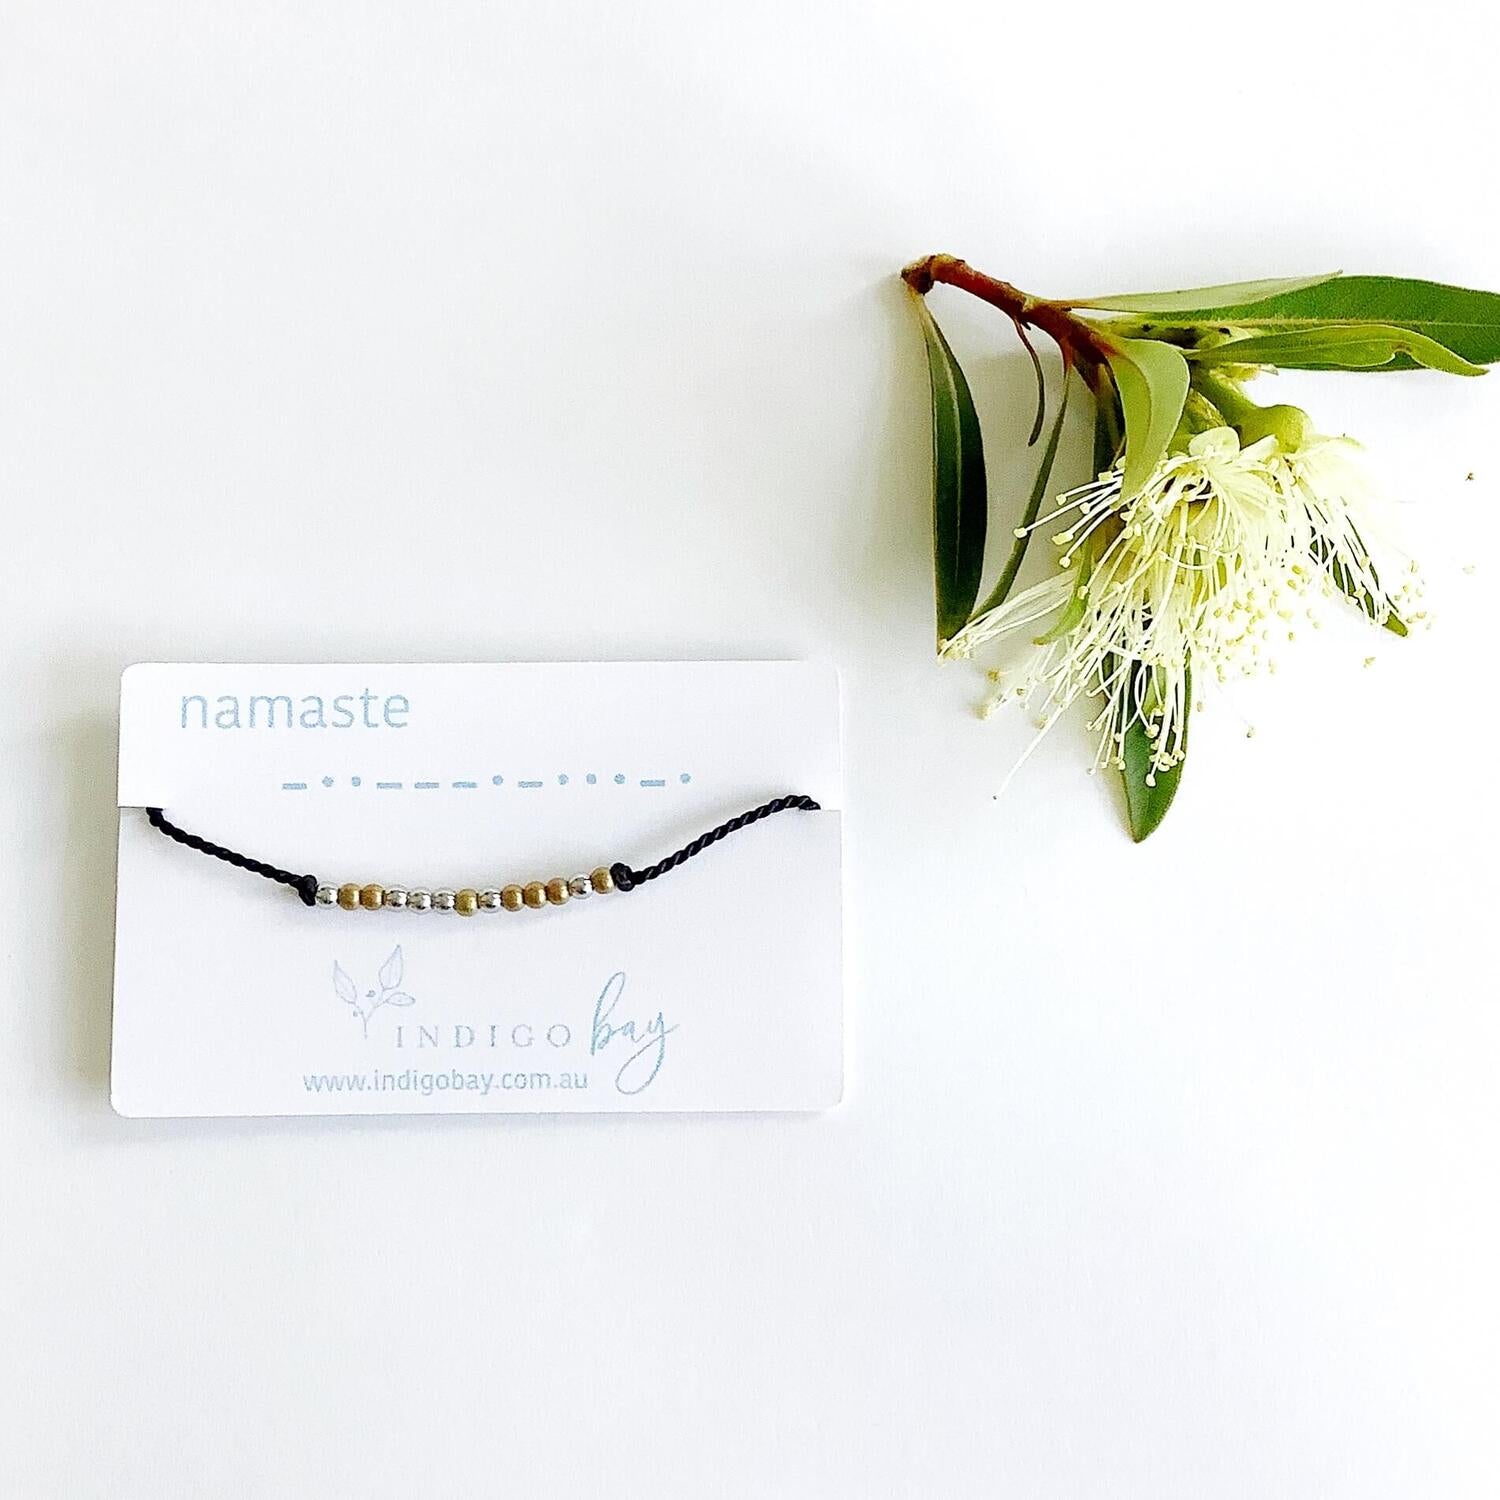 Namaste Morse code beaded bracelet on black cord on a white card with blue text